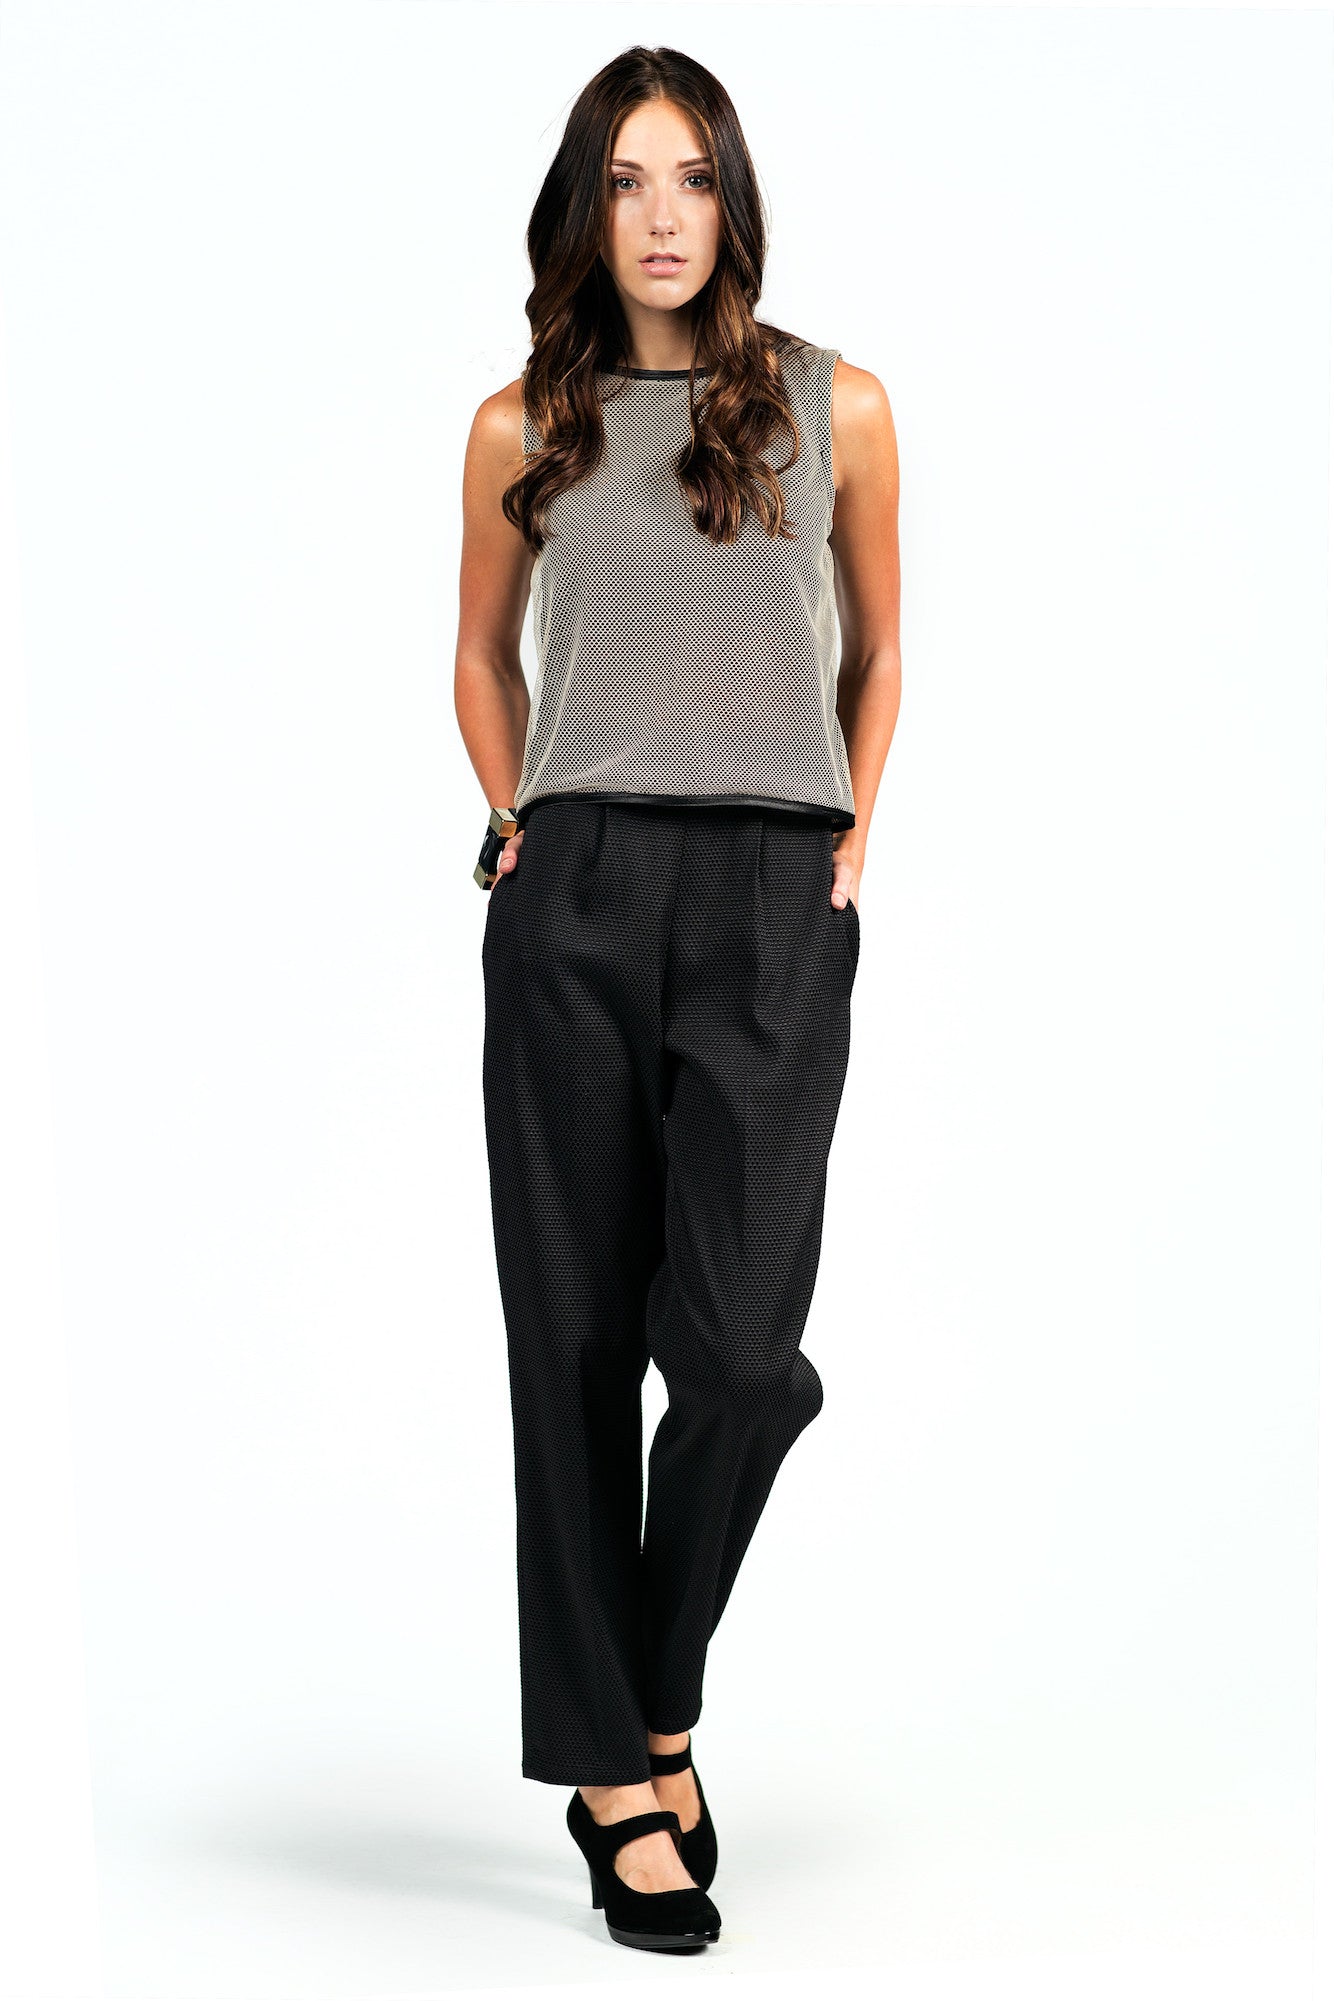 Grey Cotton Embroidered Stretchable Pants | Luvit-102-Grey | Cilory.com